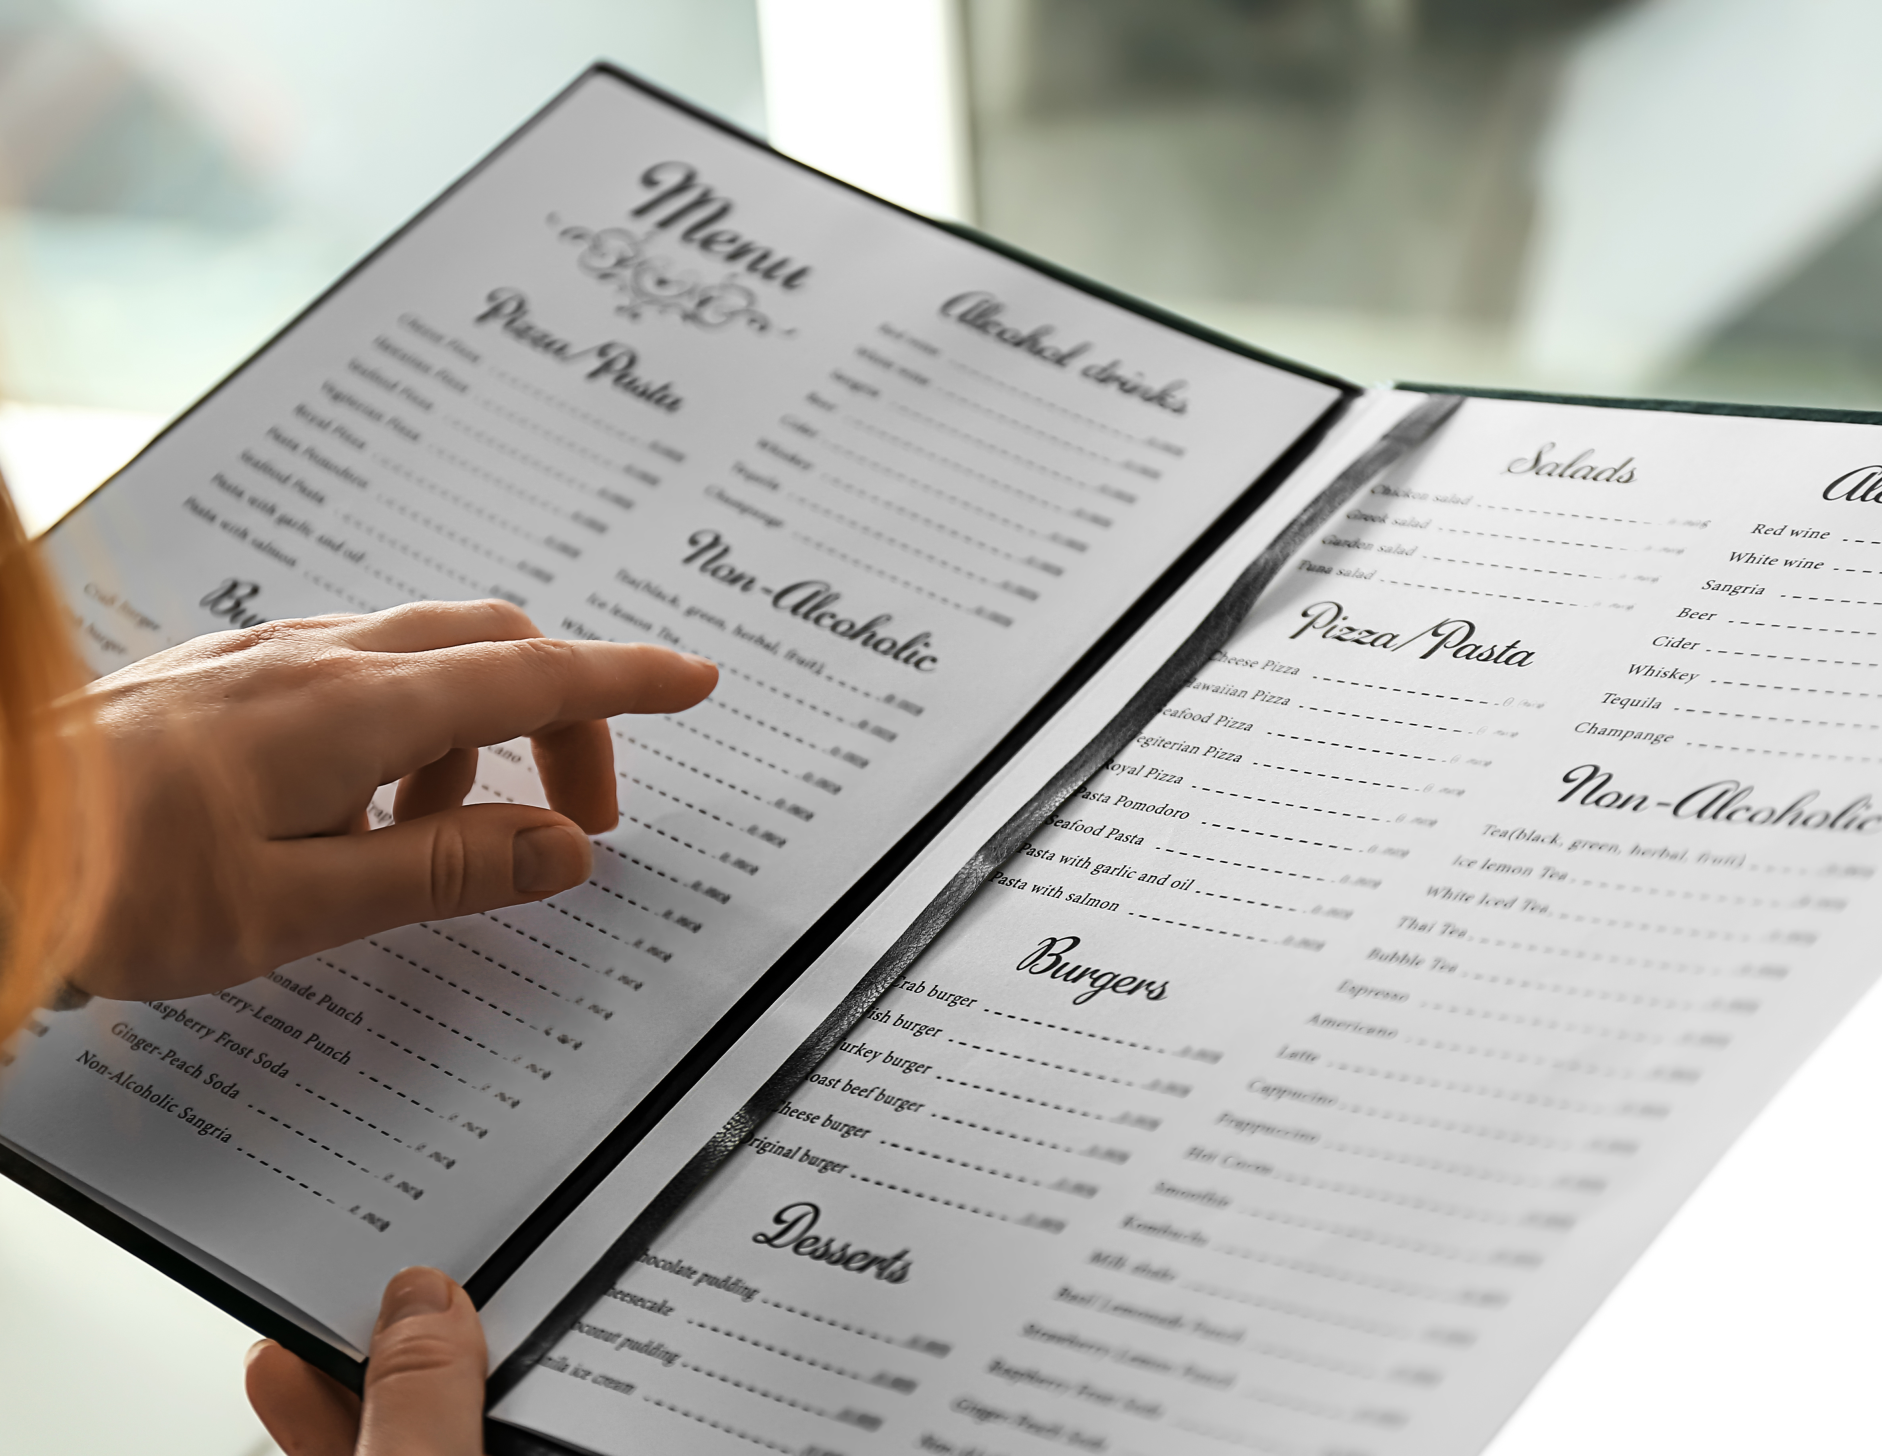 Close up image of a person reading a menu